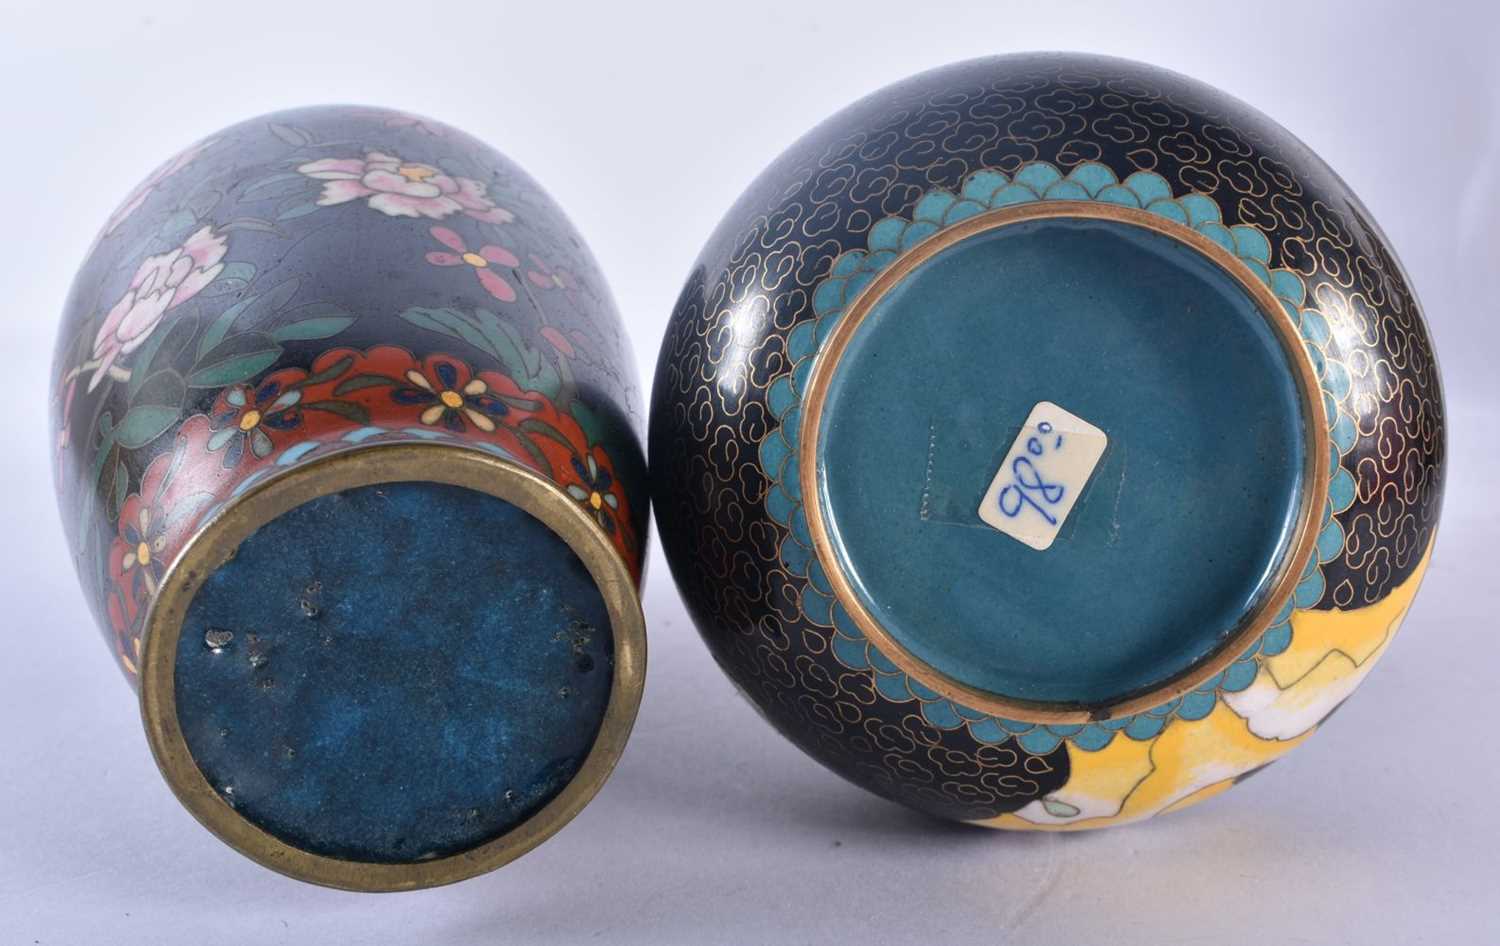 TWO CHINESE CLOISONNE ENAMEL EGGS together with cloisonne vases etc. Largest 21 cm high. (qty) - Image 7 of 9